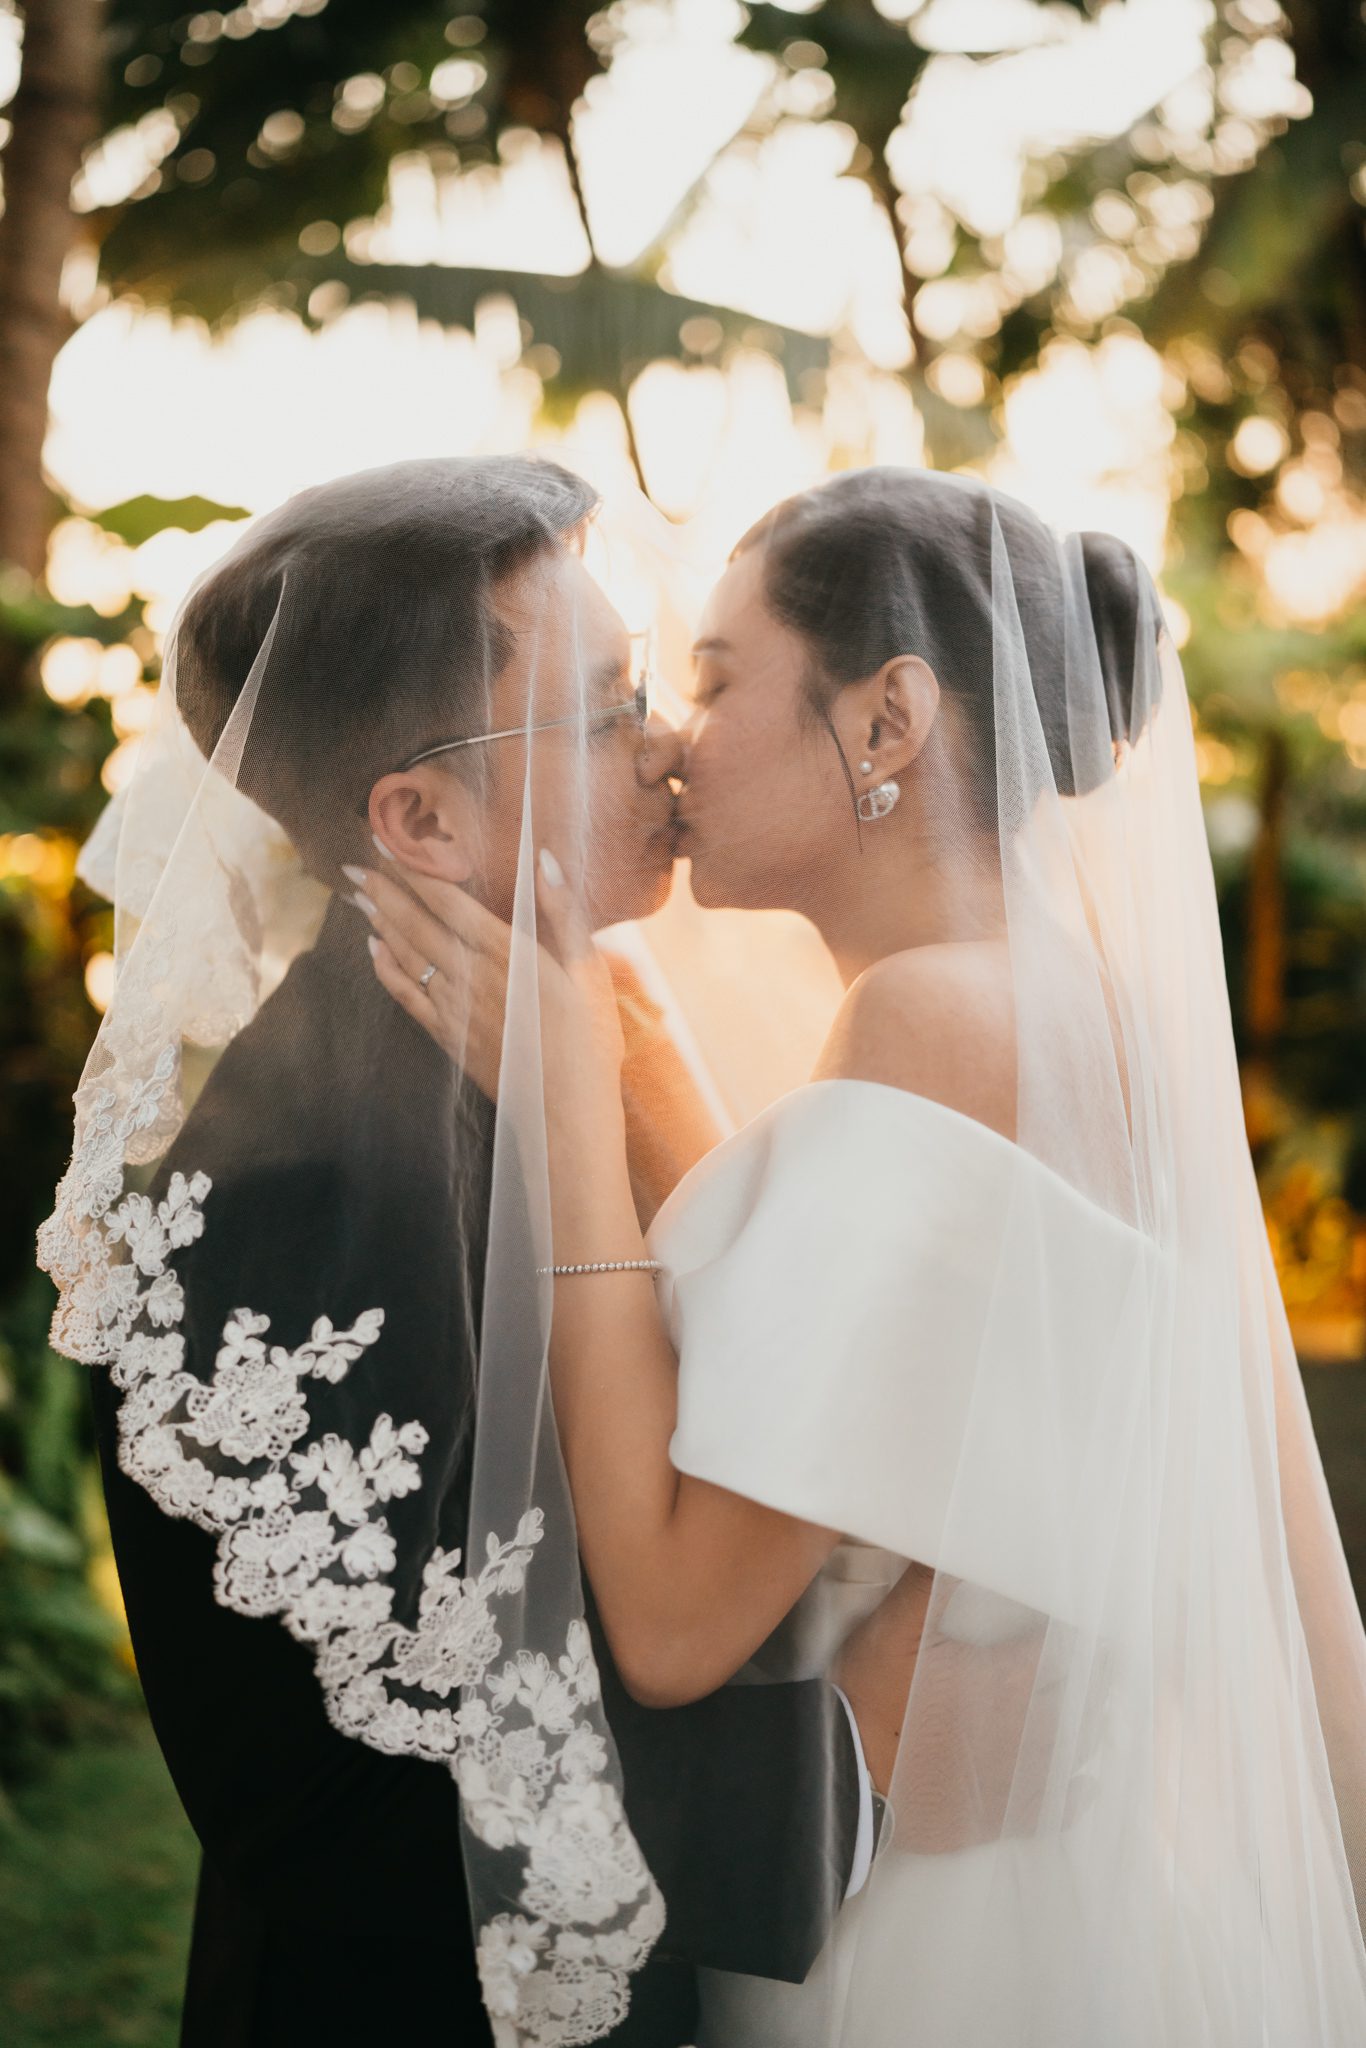 Saigon intimate wedding at An Lam Retreat 4954 - The Planners